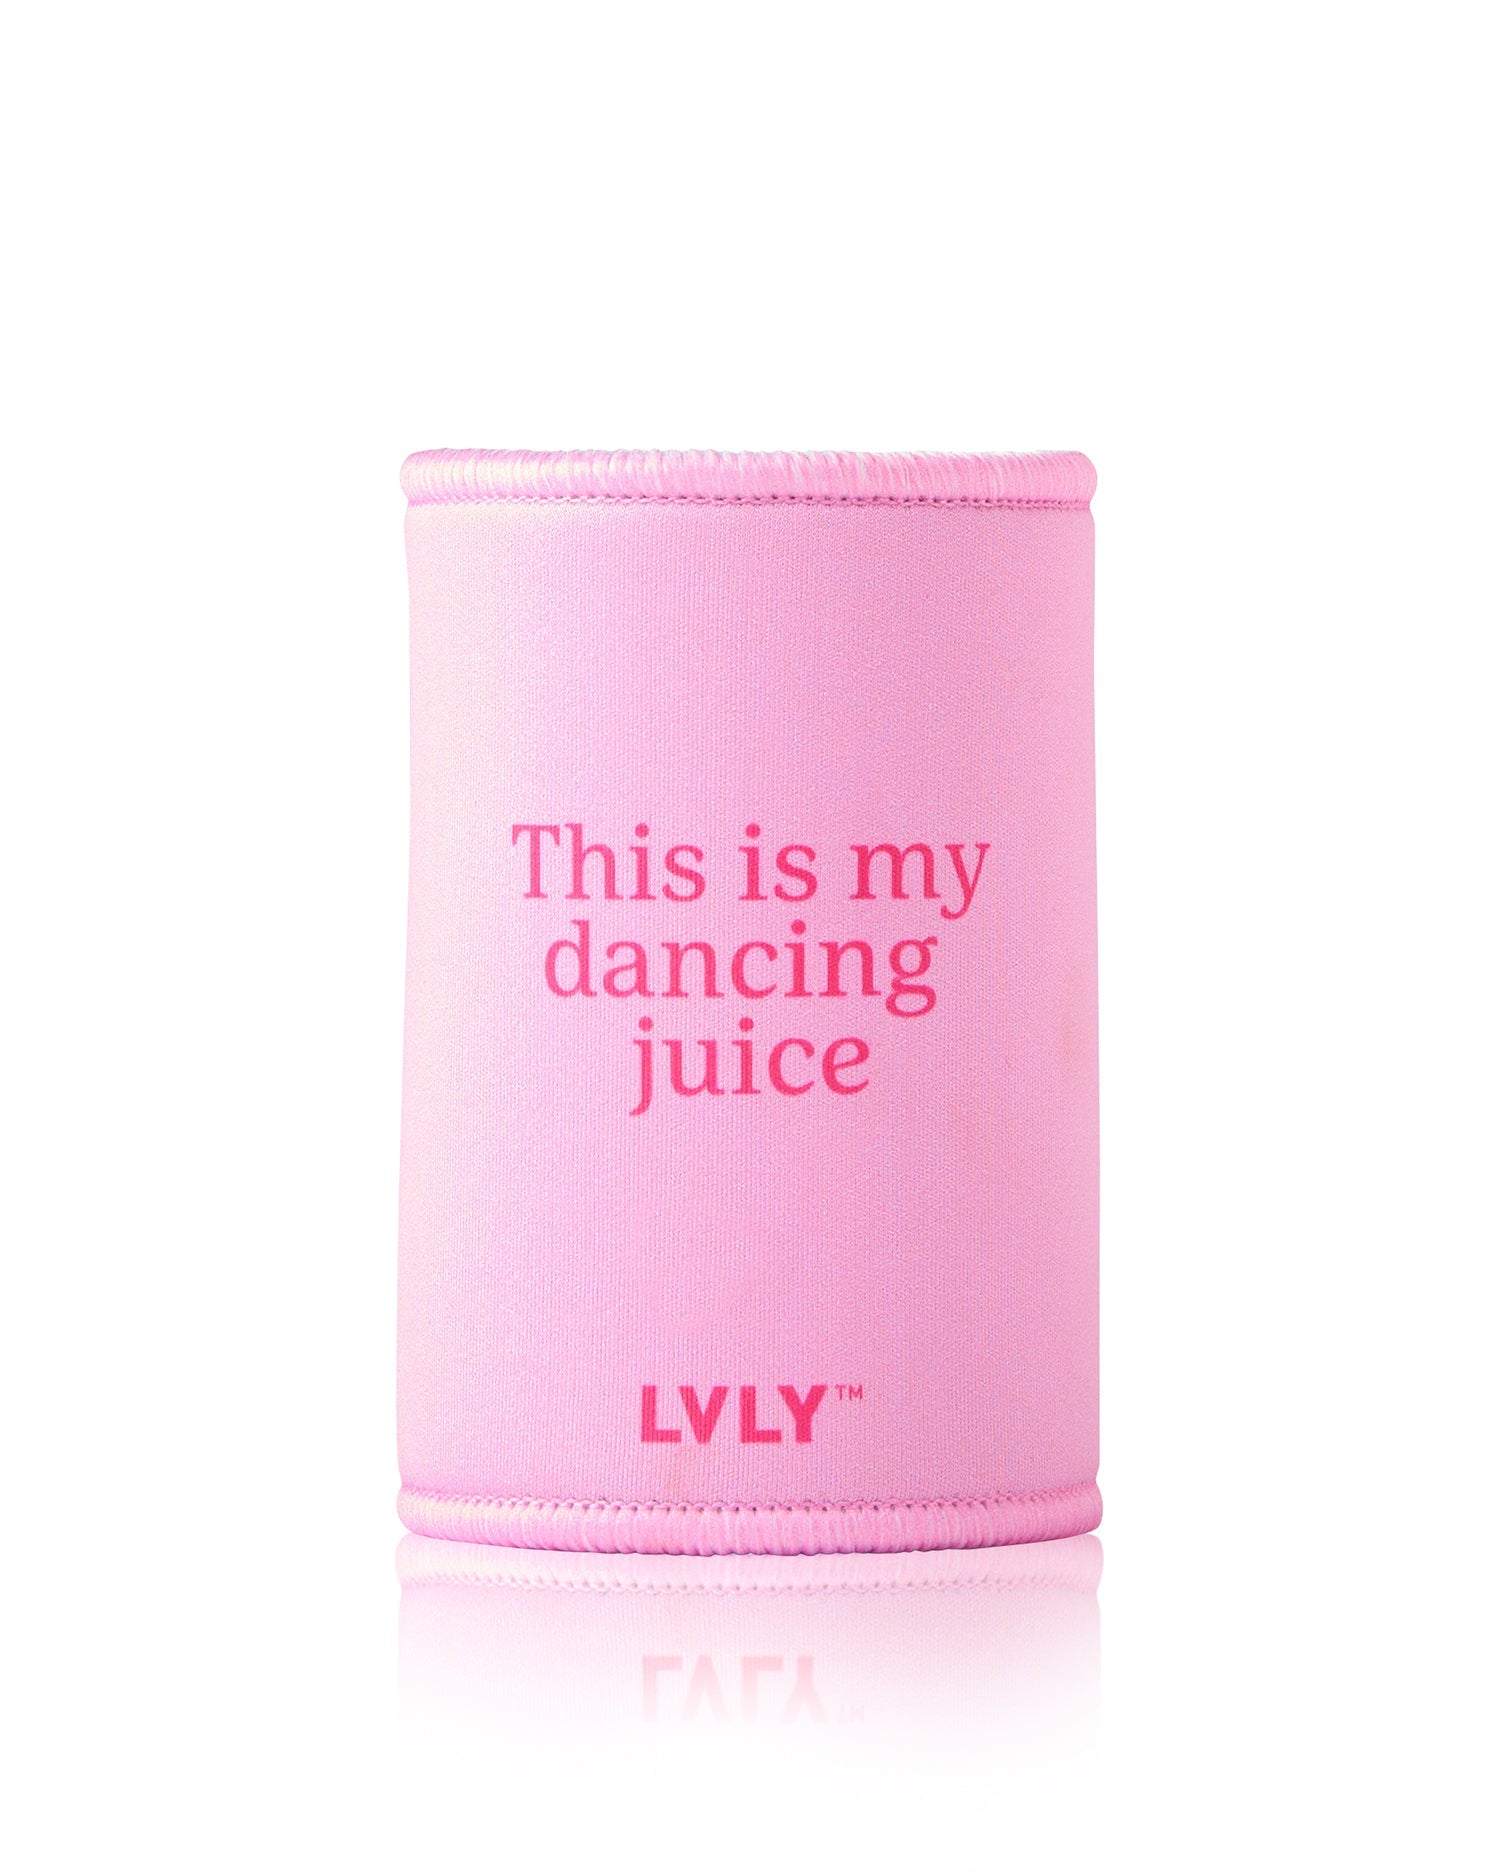 'This is my dancing juice' Stubby Holder